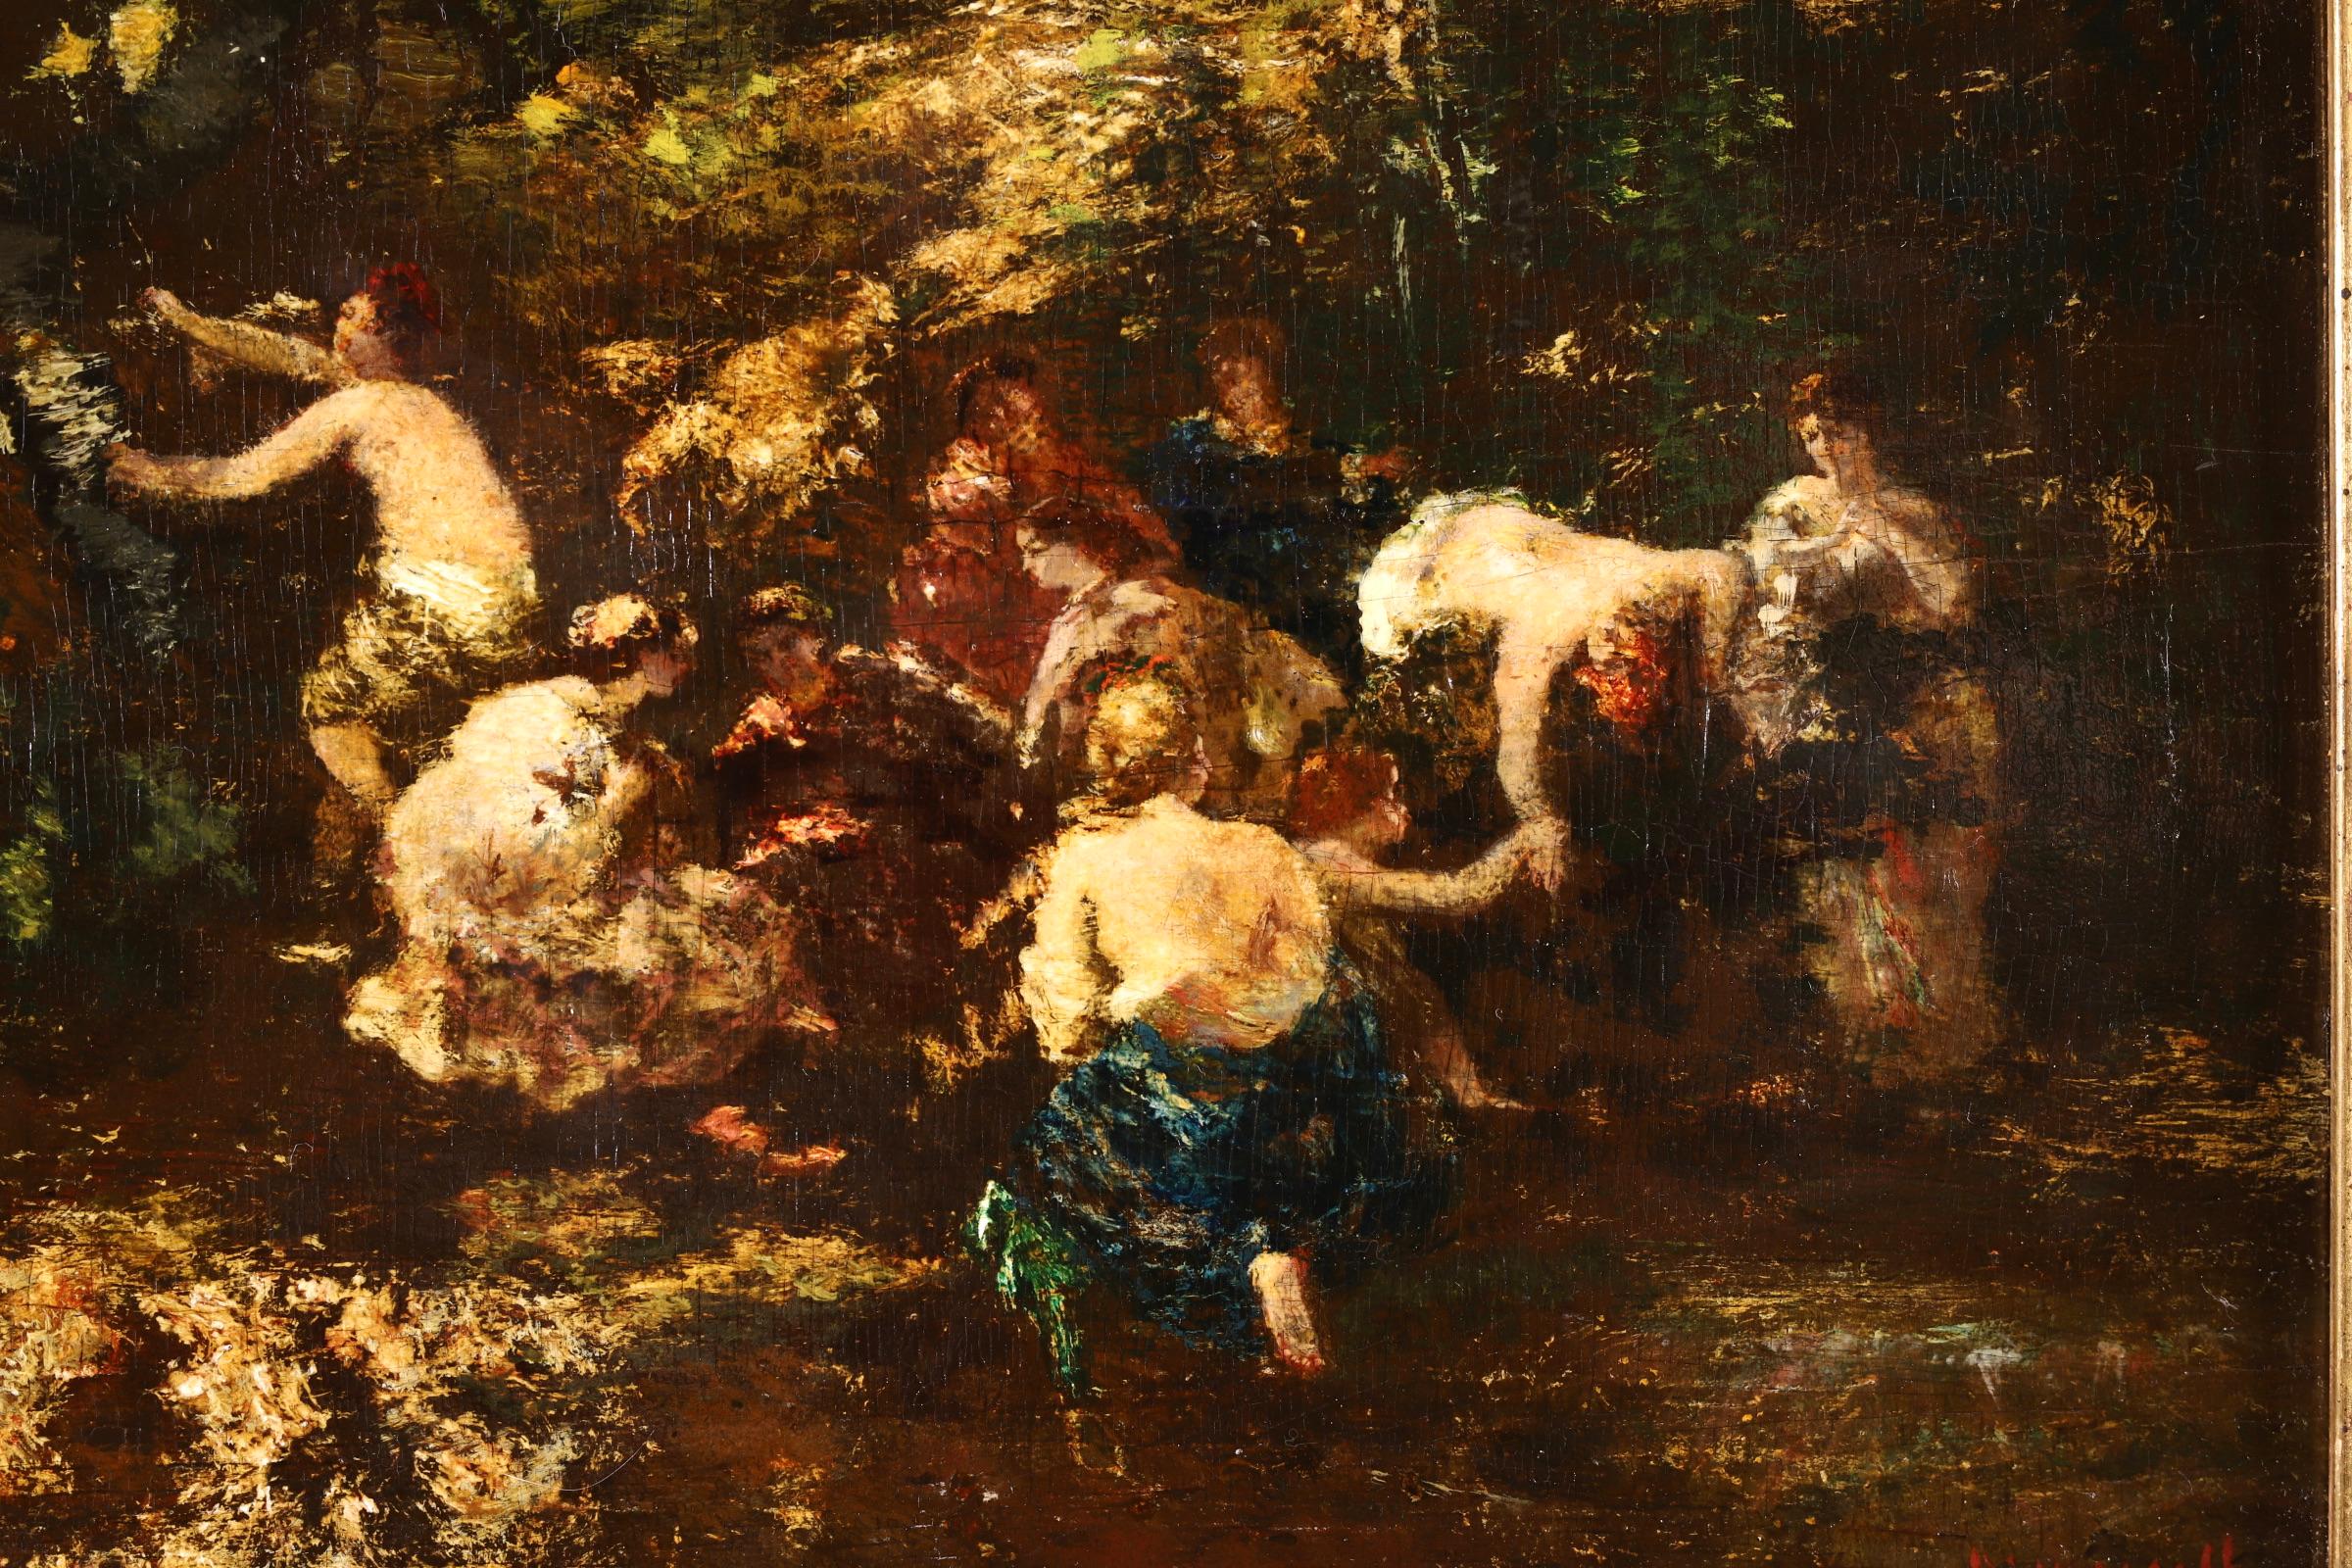 Les Baigneuses - Impressionist Oil, Figures in Landscape by Adolphe Monticelli 6